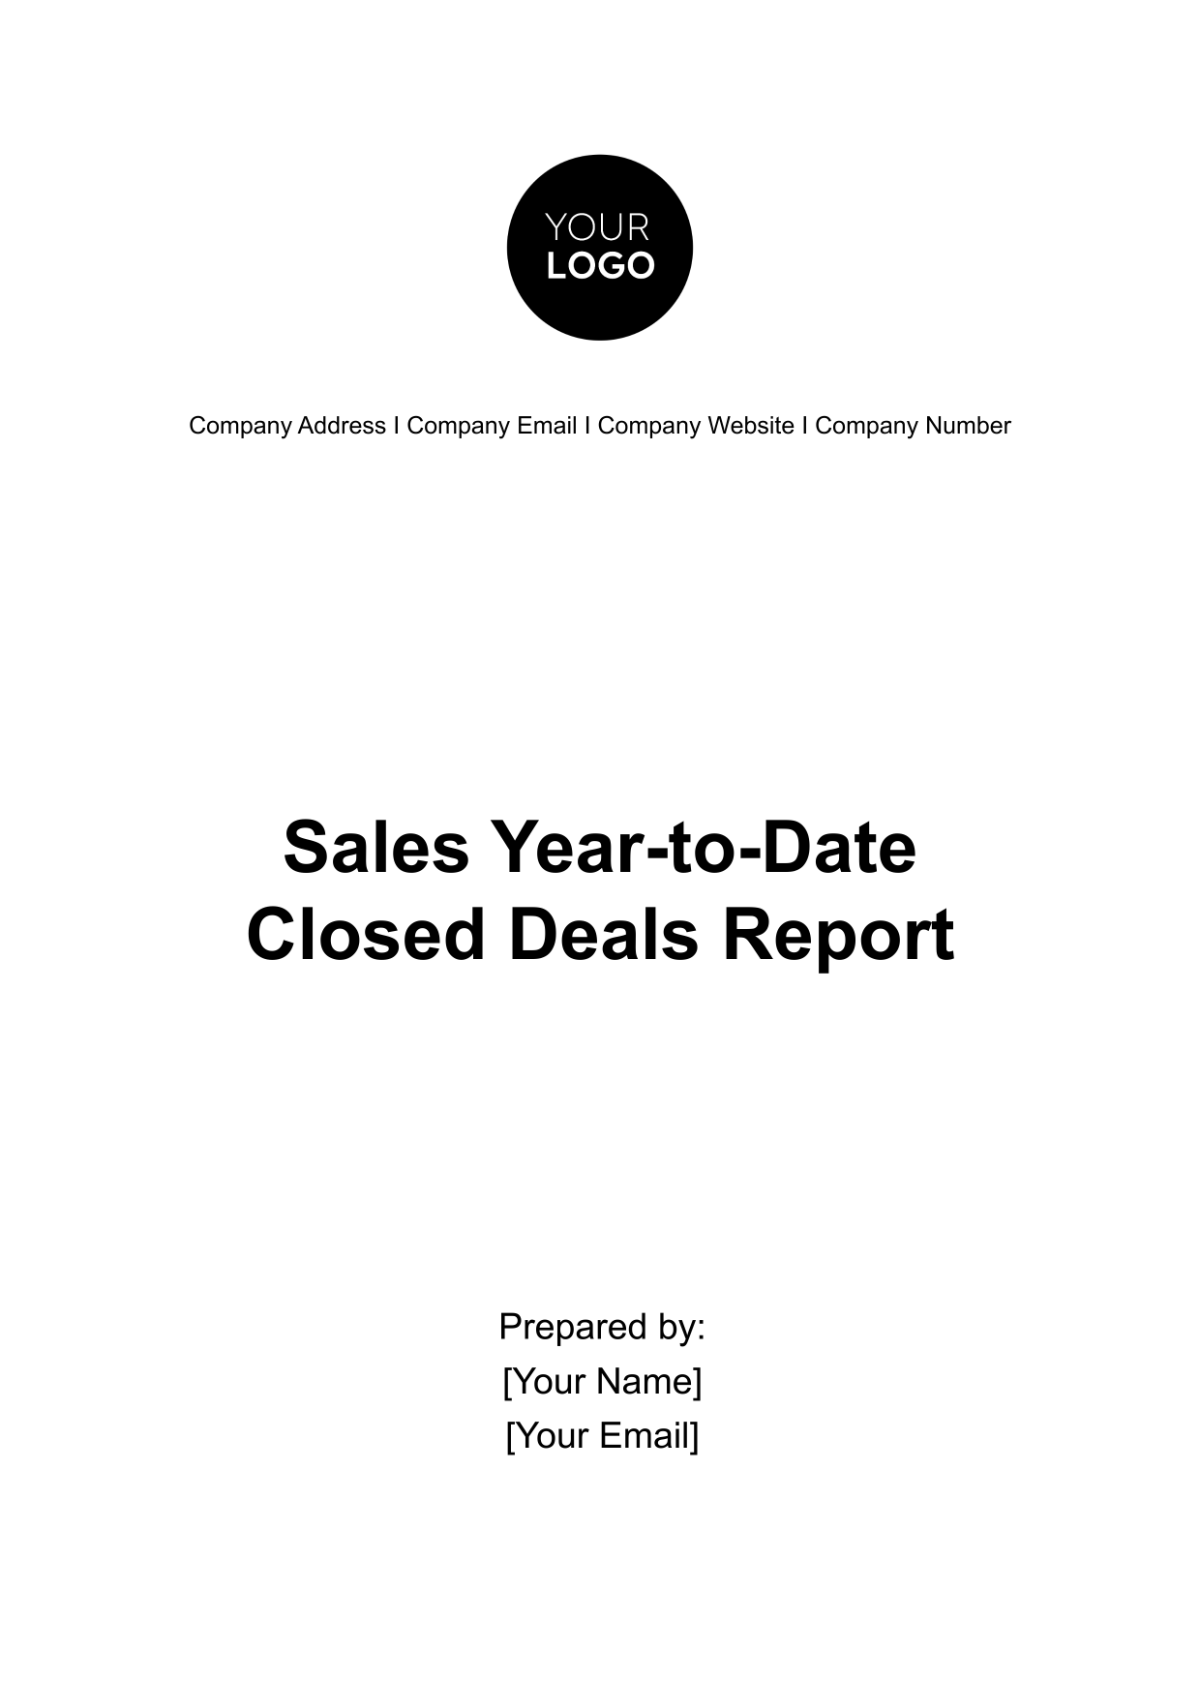 Free Sales Year-to-Date Closed Deals Report Template